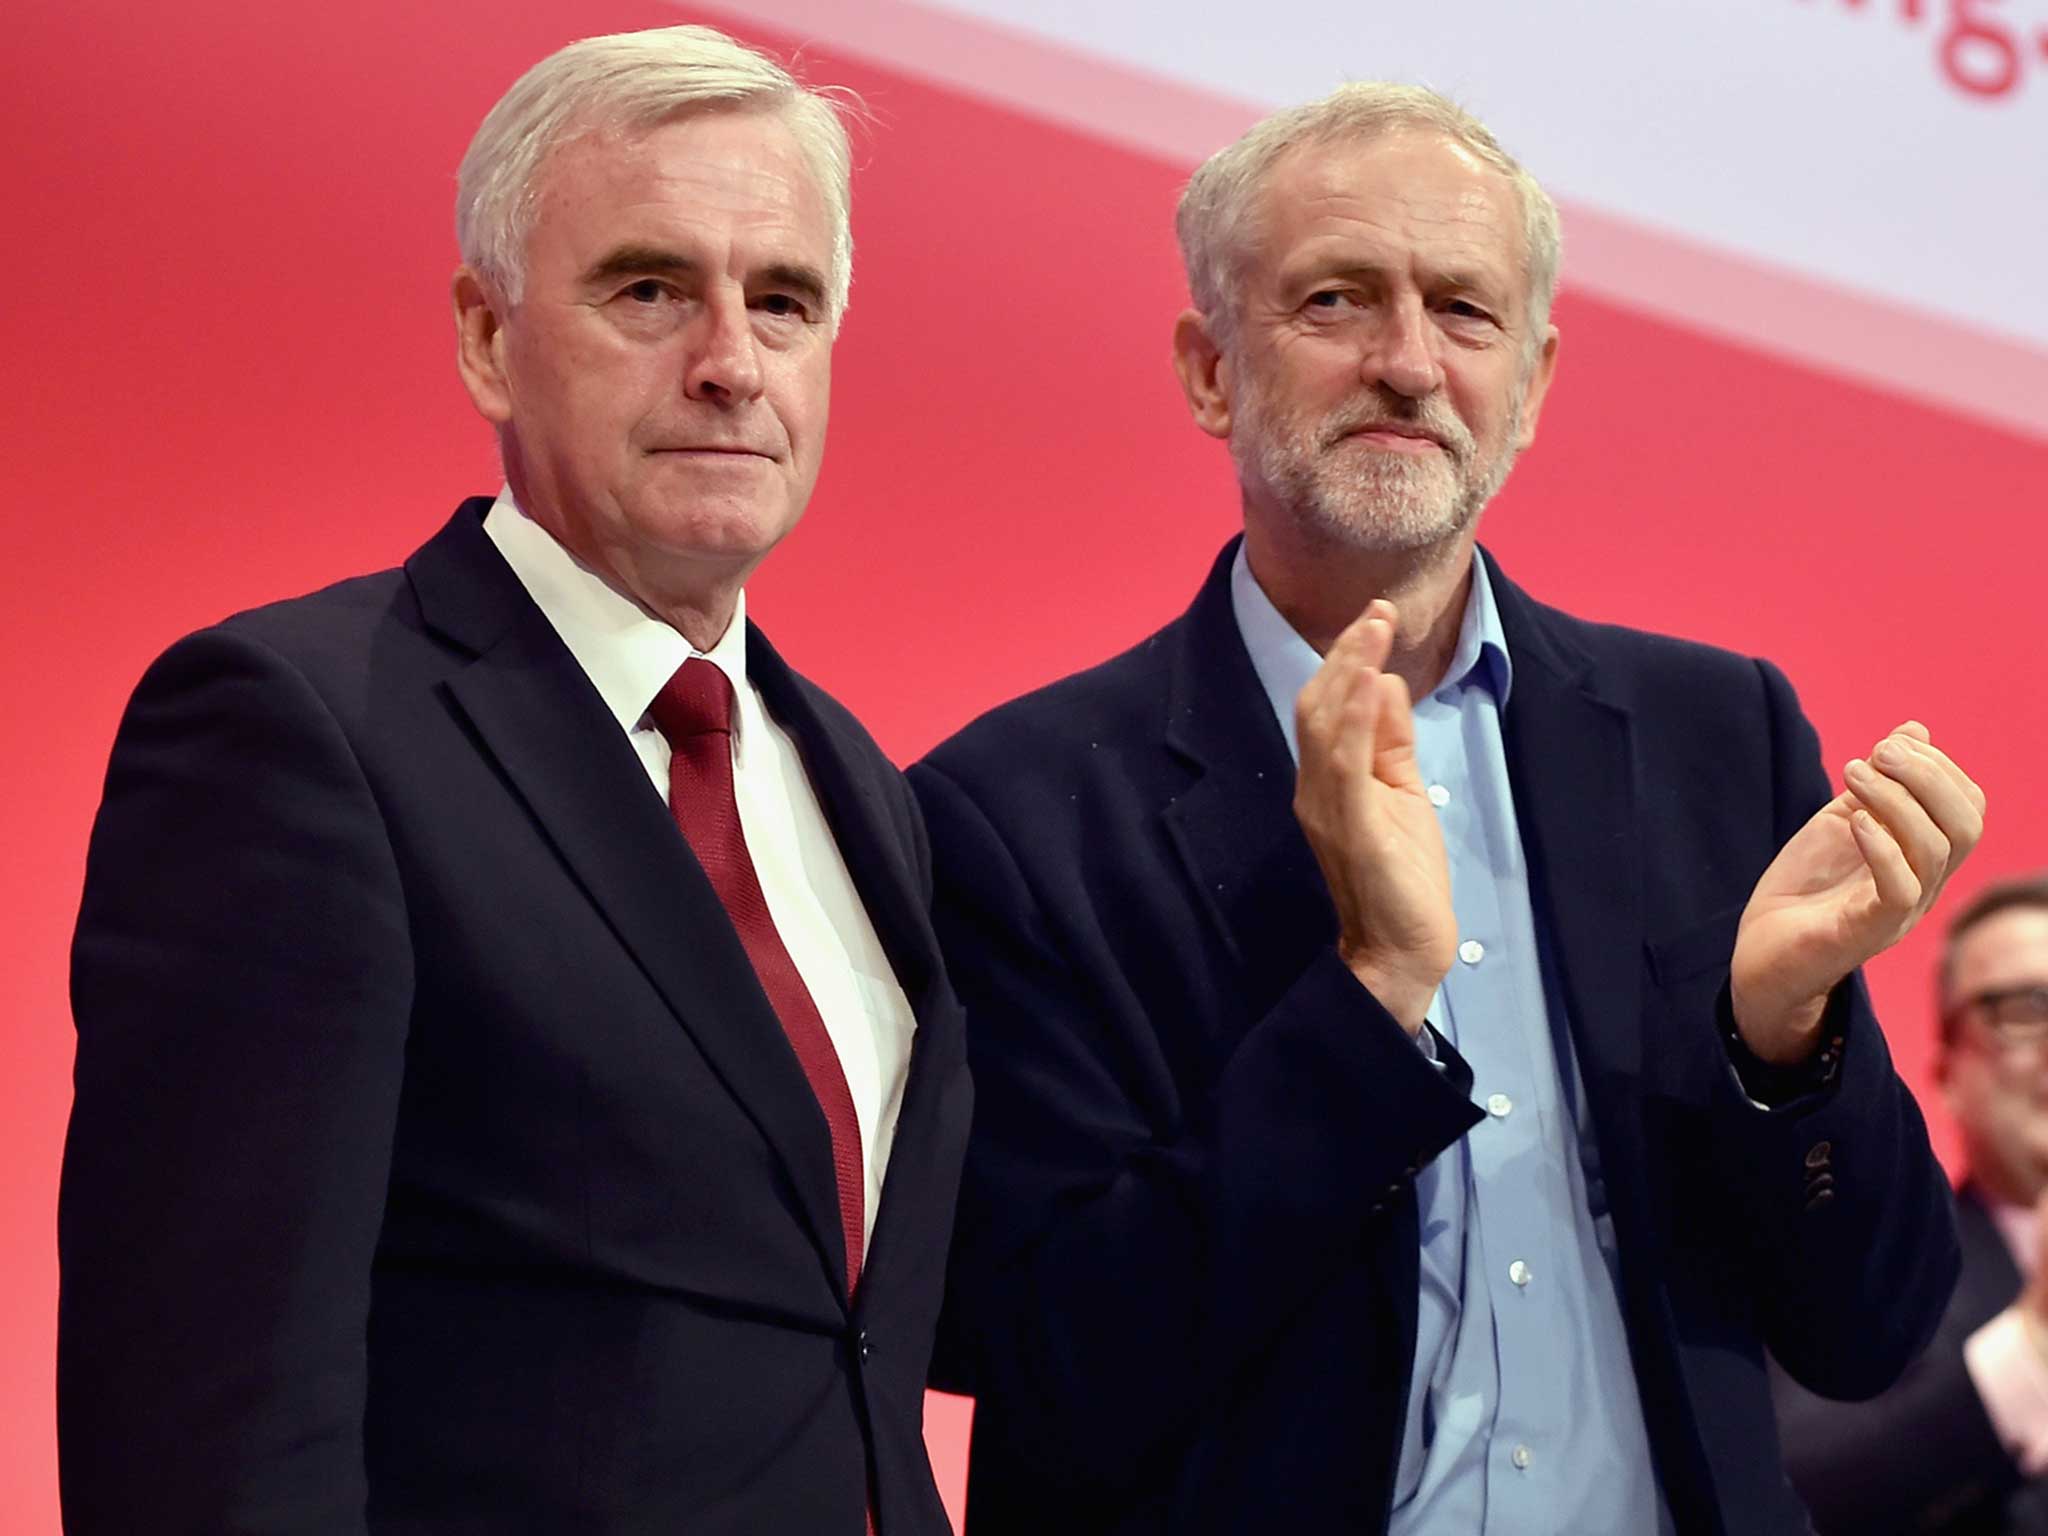 John McDonnell has threatened to bundle the Labour leader into a taxi and send him to Buckingham Palace should the PM defy a no-confidence vote